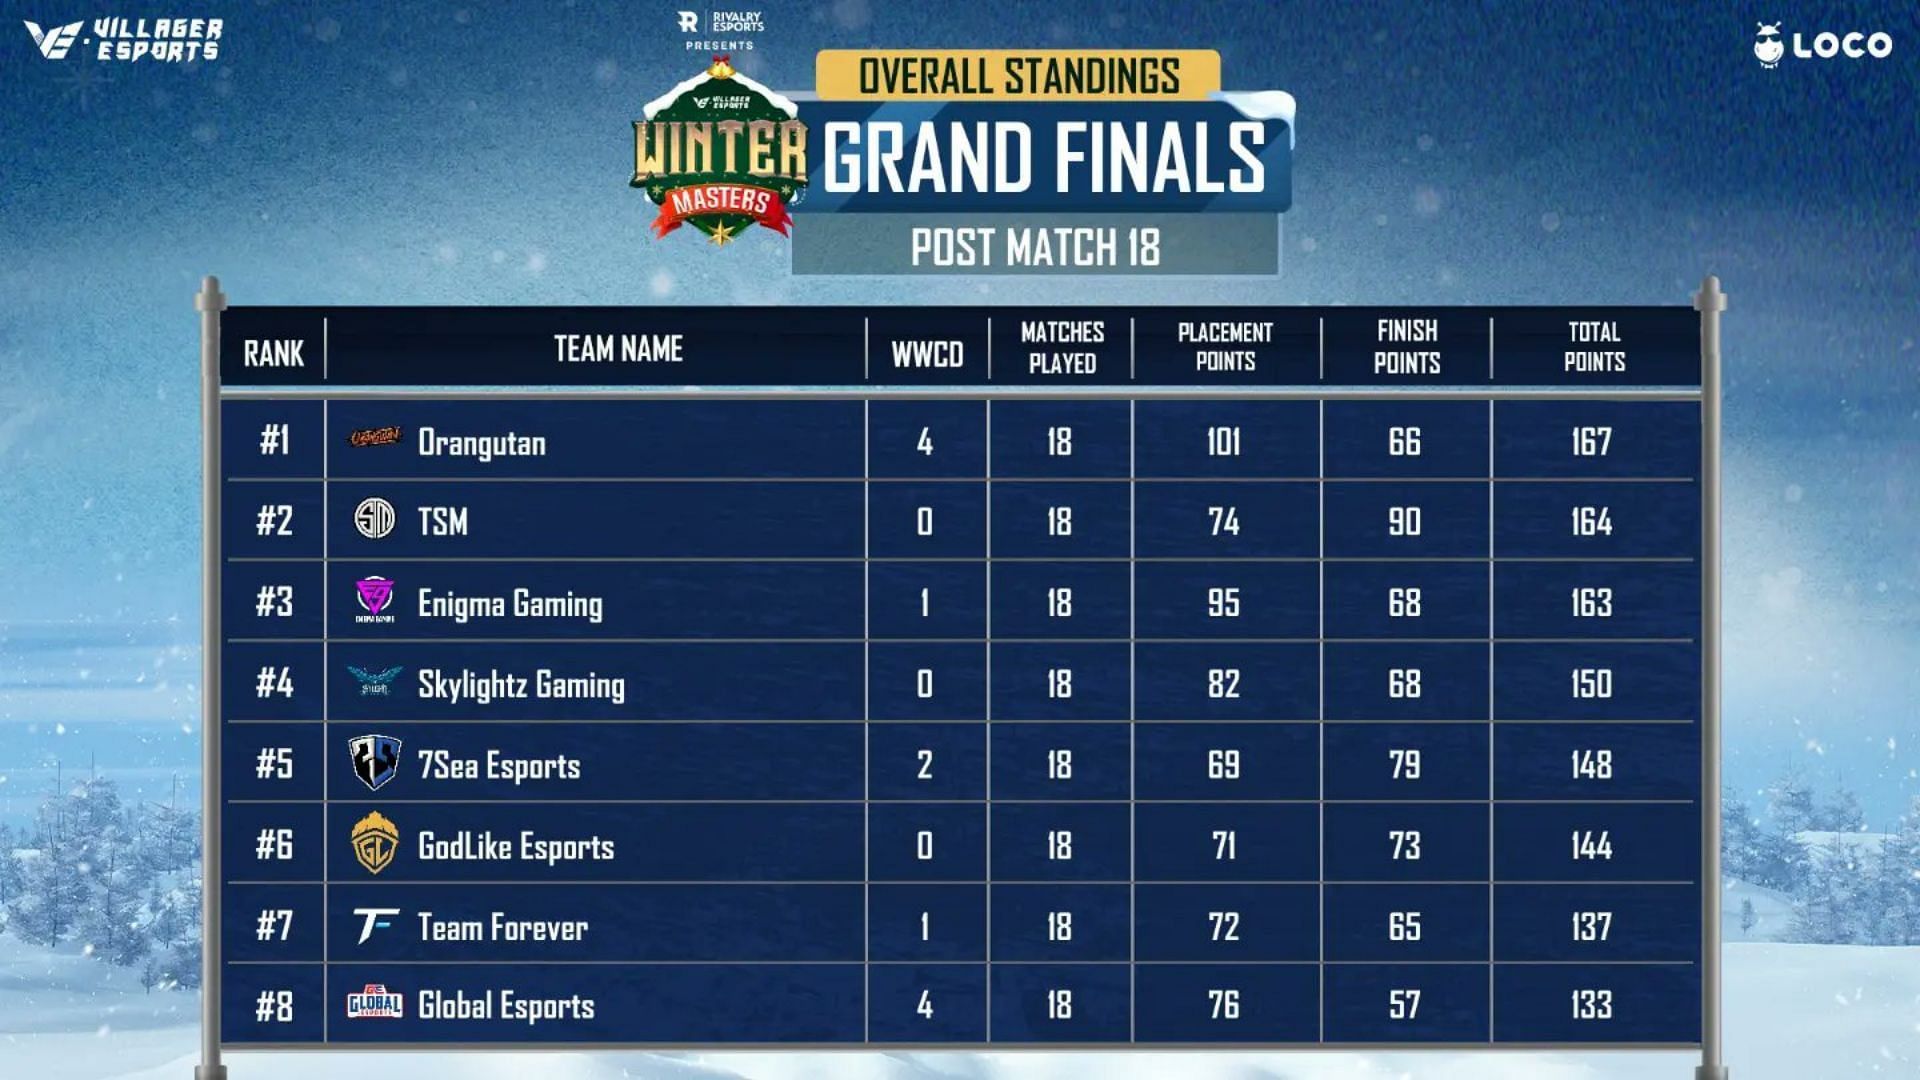 Top eight teams after BGMI Winter Finals Day 3 (Image via Villager Esports)